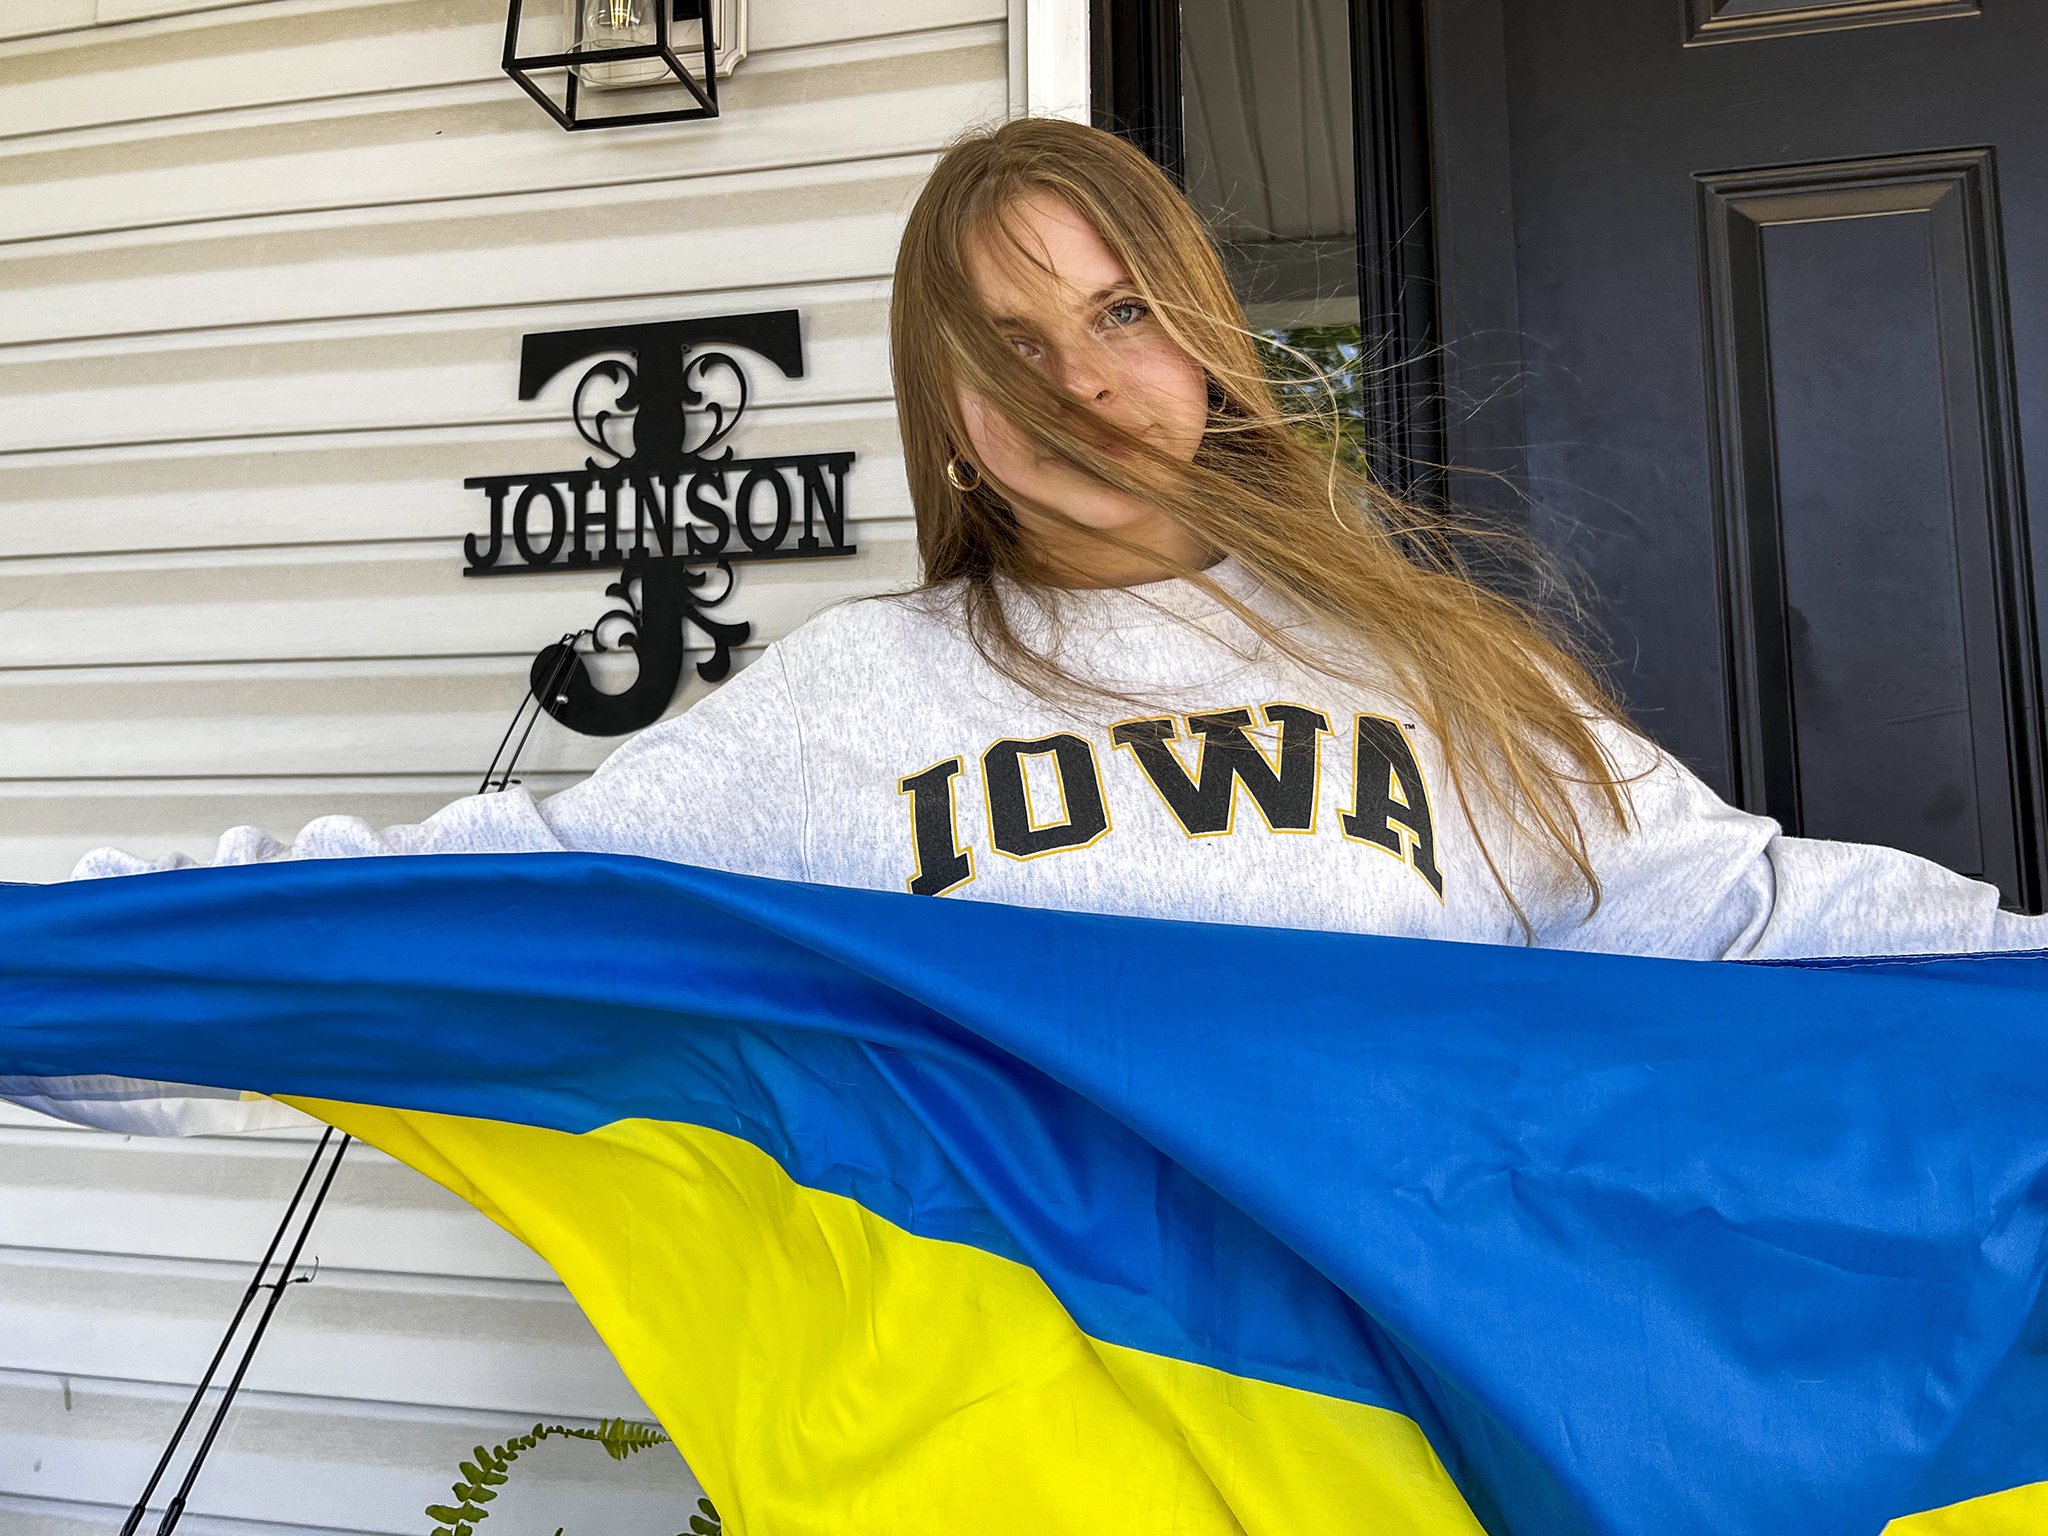 Liza stands outside her host family's front door, spanning a Ukrainian flag across her wingspan. Her hair in the wind partially covers her face. She is wearing a gray sweatshirt that reads “Iowa” across her chest. A metal “J” that reads “Johnson” hangs on the wall.